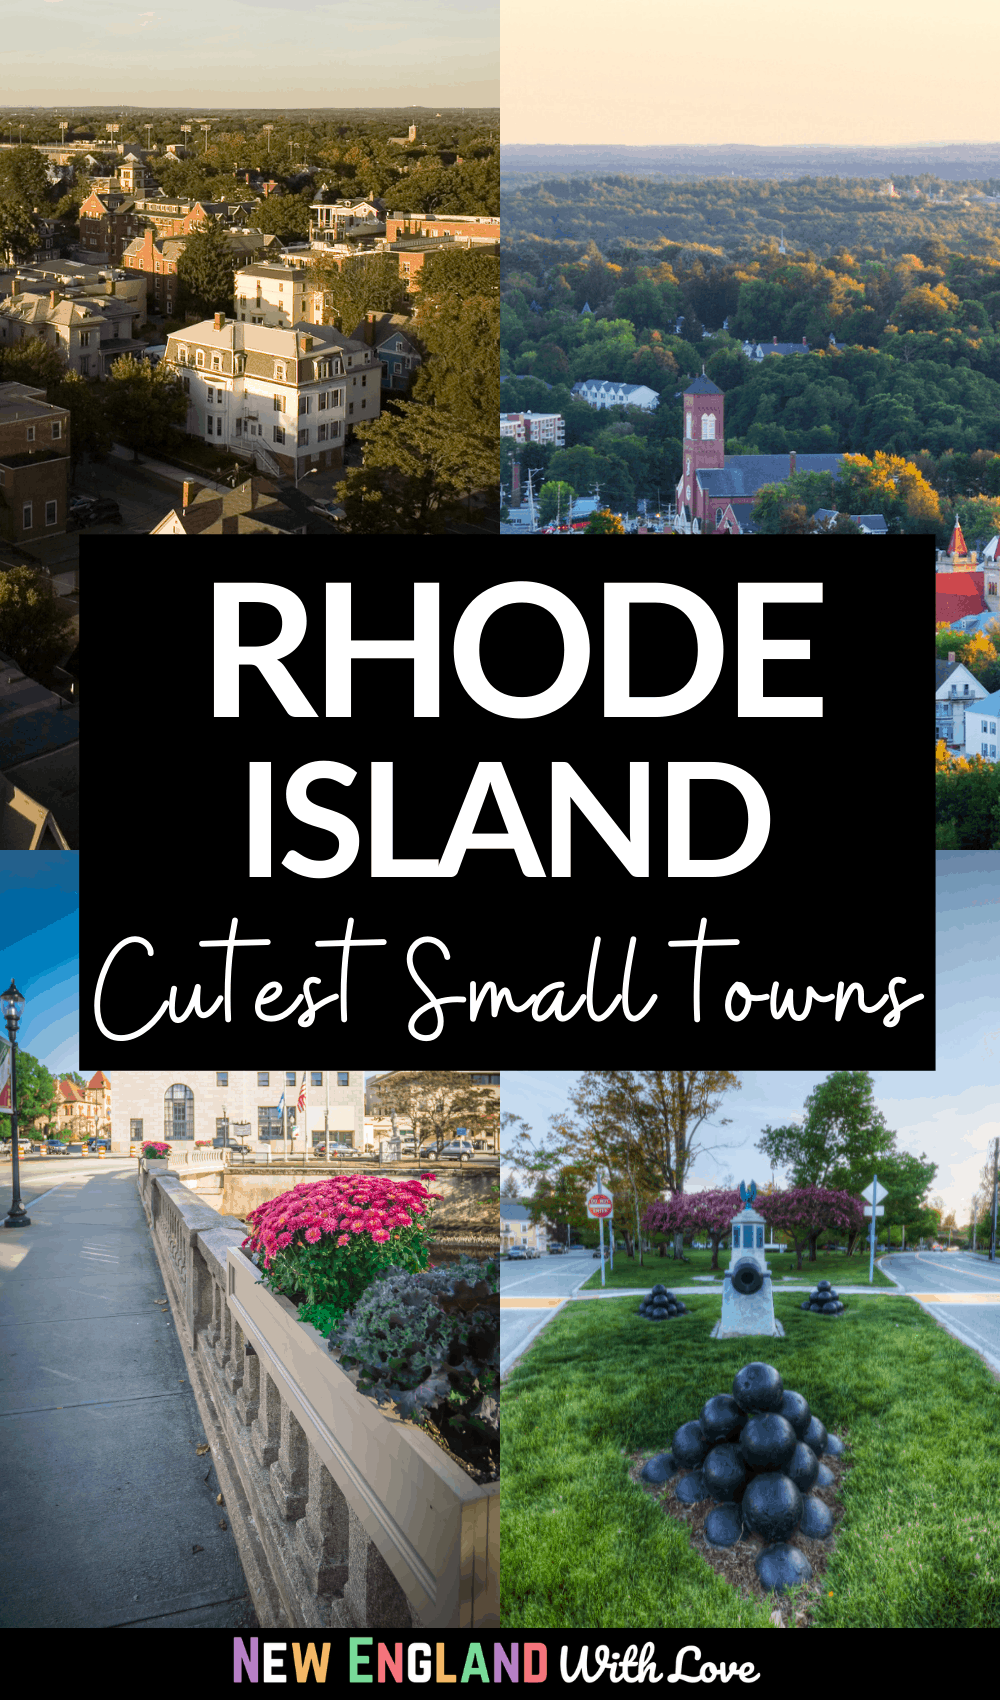 Pinterest graphic reading "Rhode Island Cutest Small Towns"